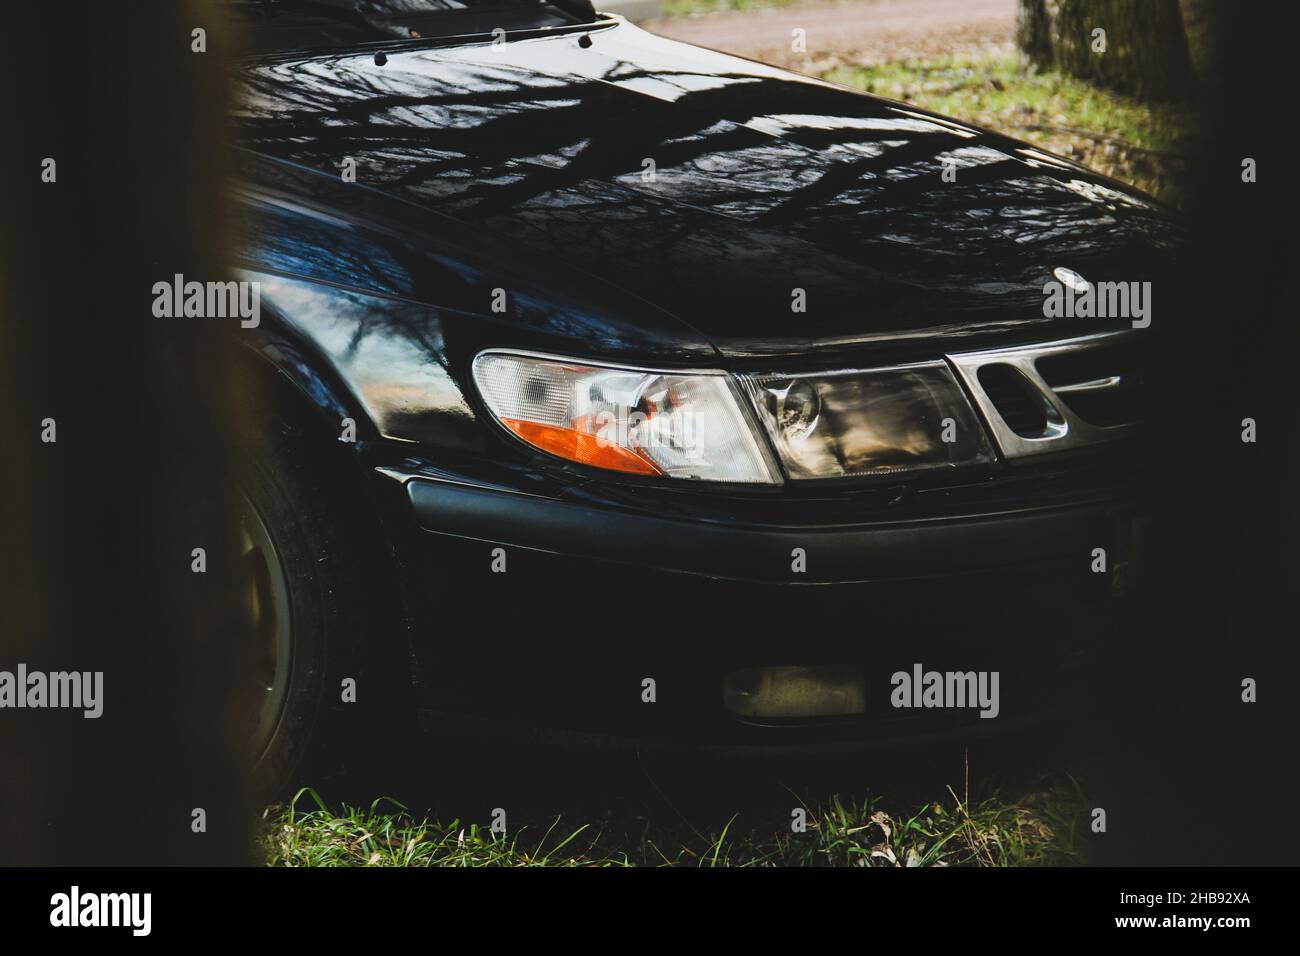 Chernihiv, Ukraine - March 20, 2021: Old Swedish car Saab 900 Turbo in the forest. Abstract photo Stock Photo